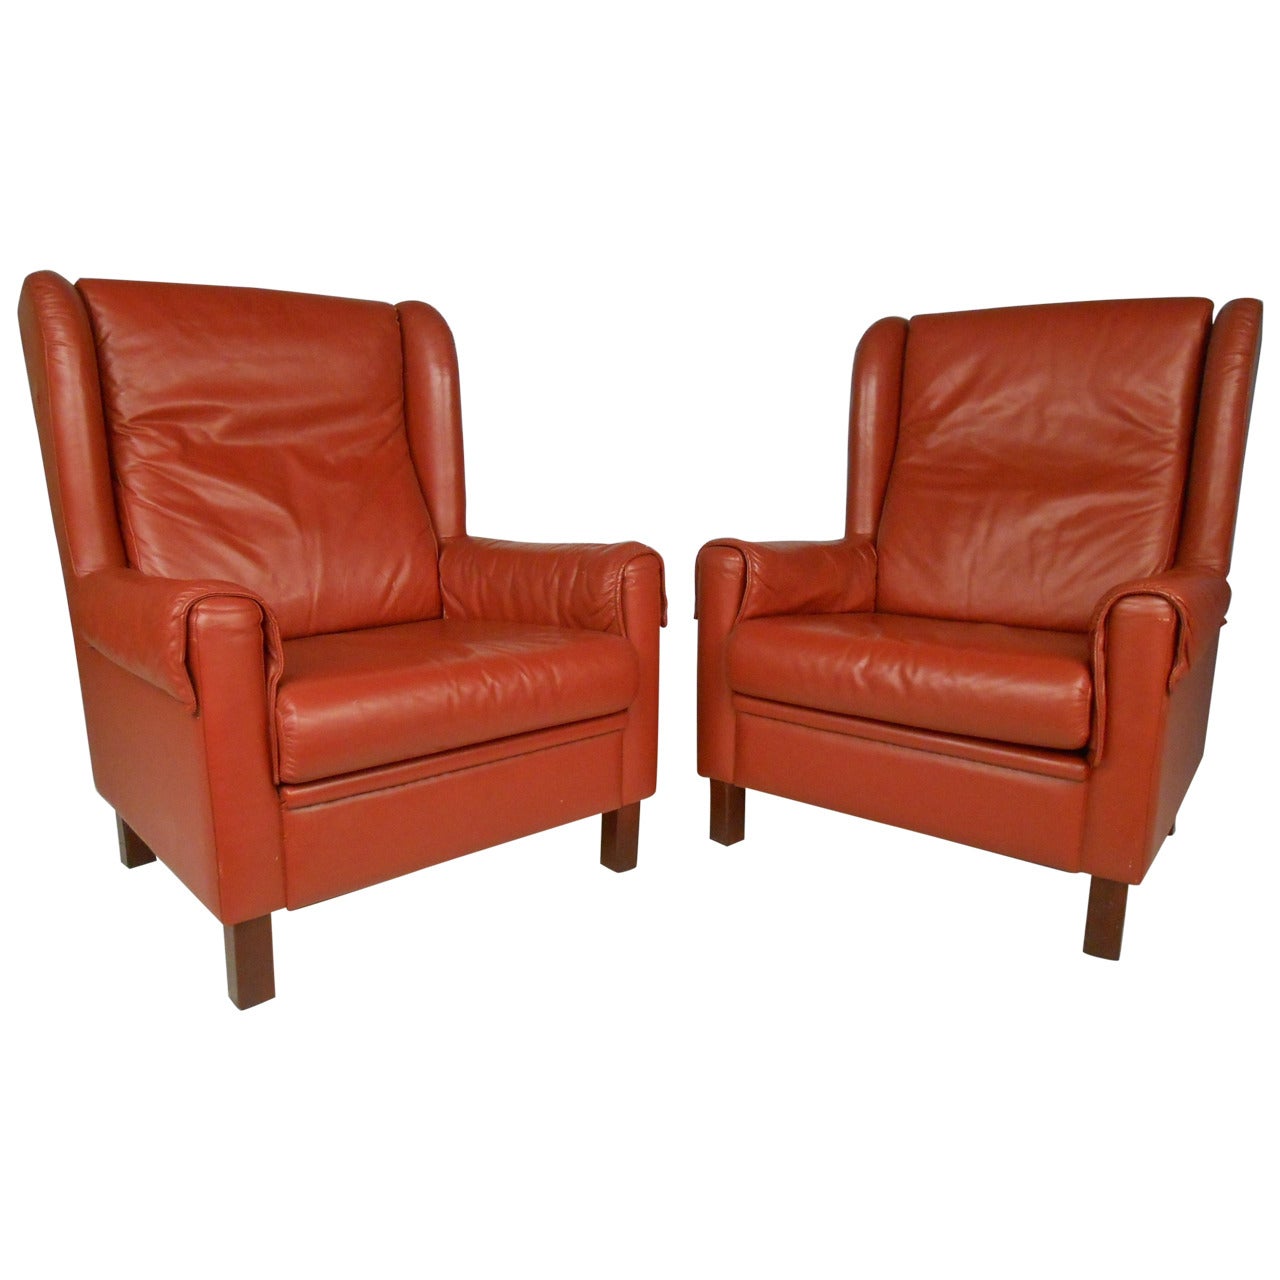 Danish Modern Wingback Leather Chairs For Sale